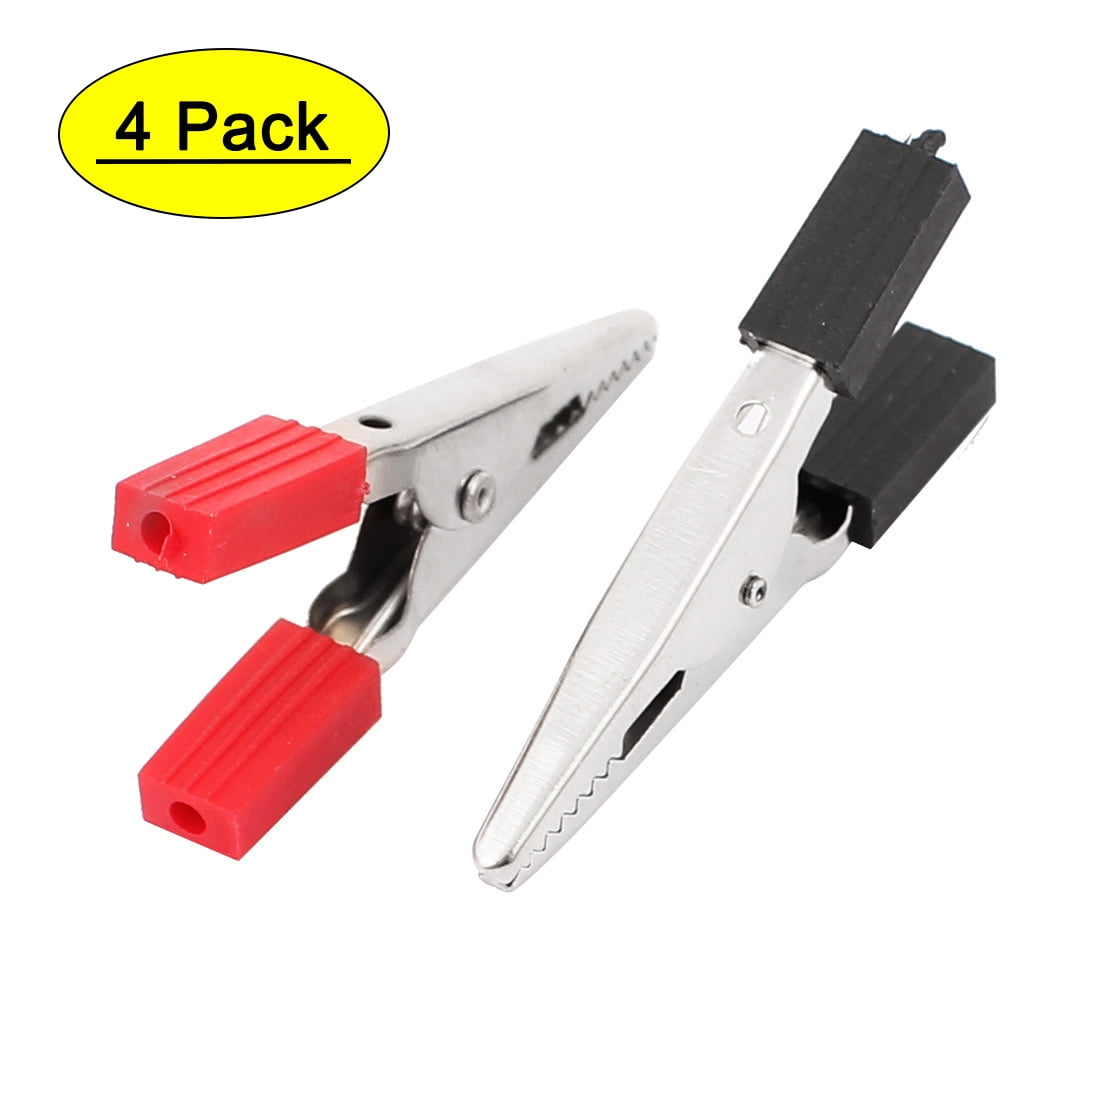 22 Pcs Insulated Cover Test Probe Alligator Clamps Crocodile Clips Red Black 